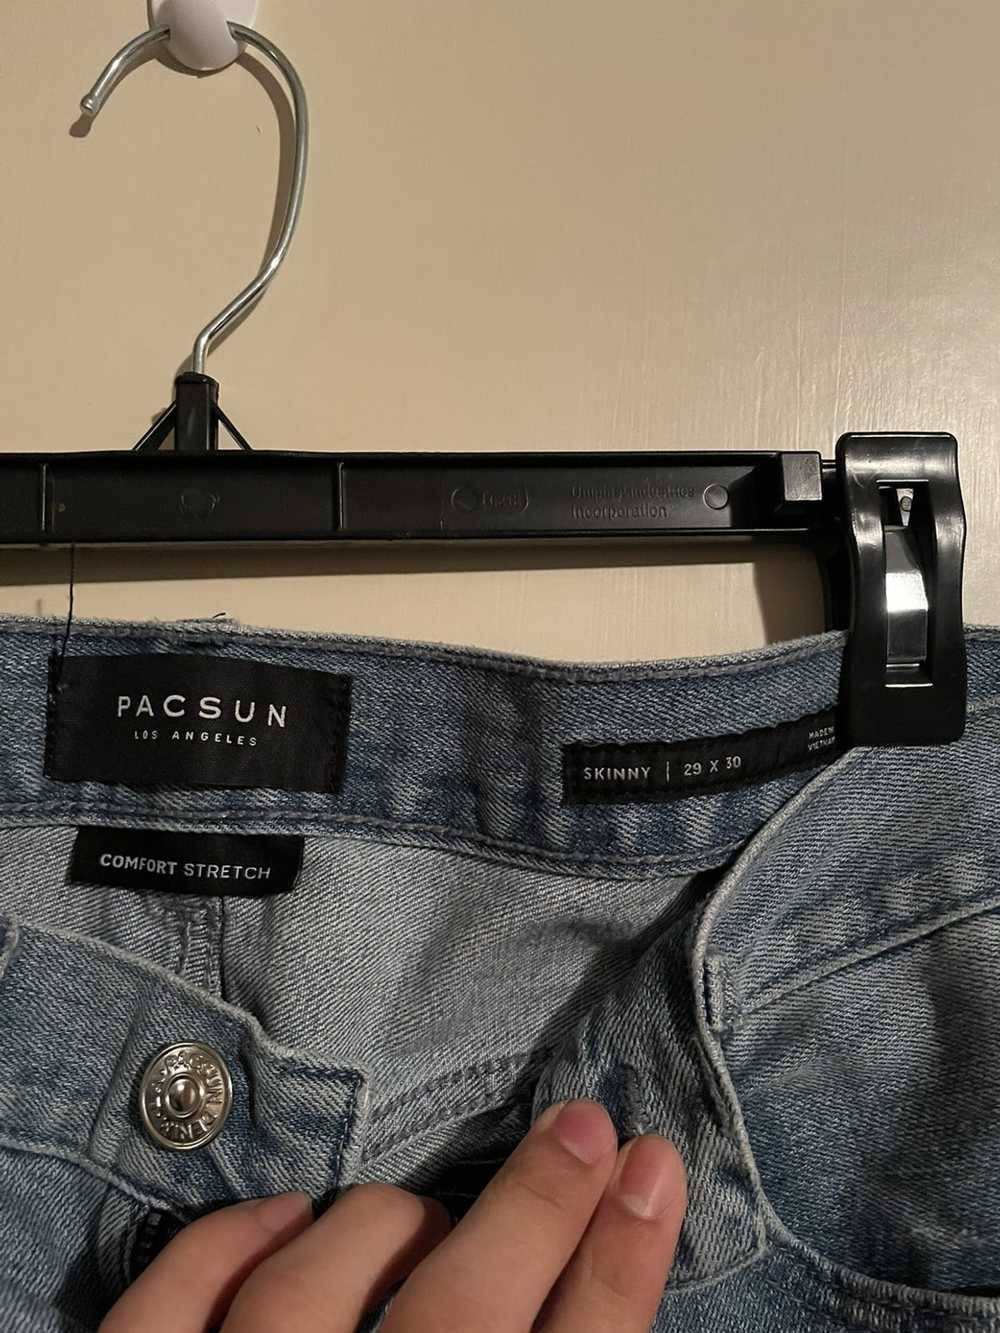 Pacsun Pacsun comfort stretch SKINNY jeans - image 3